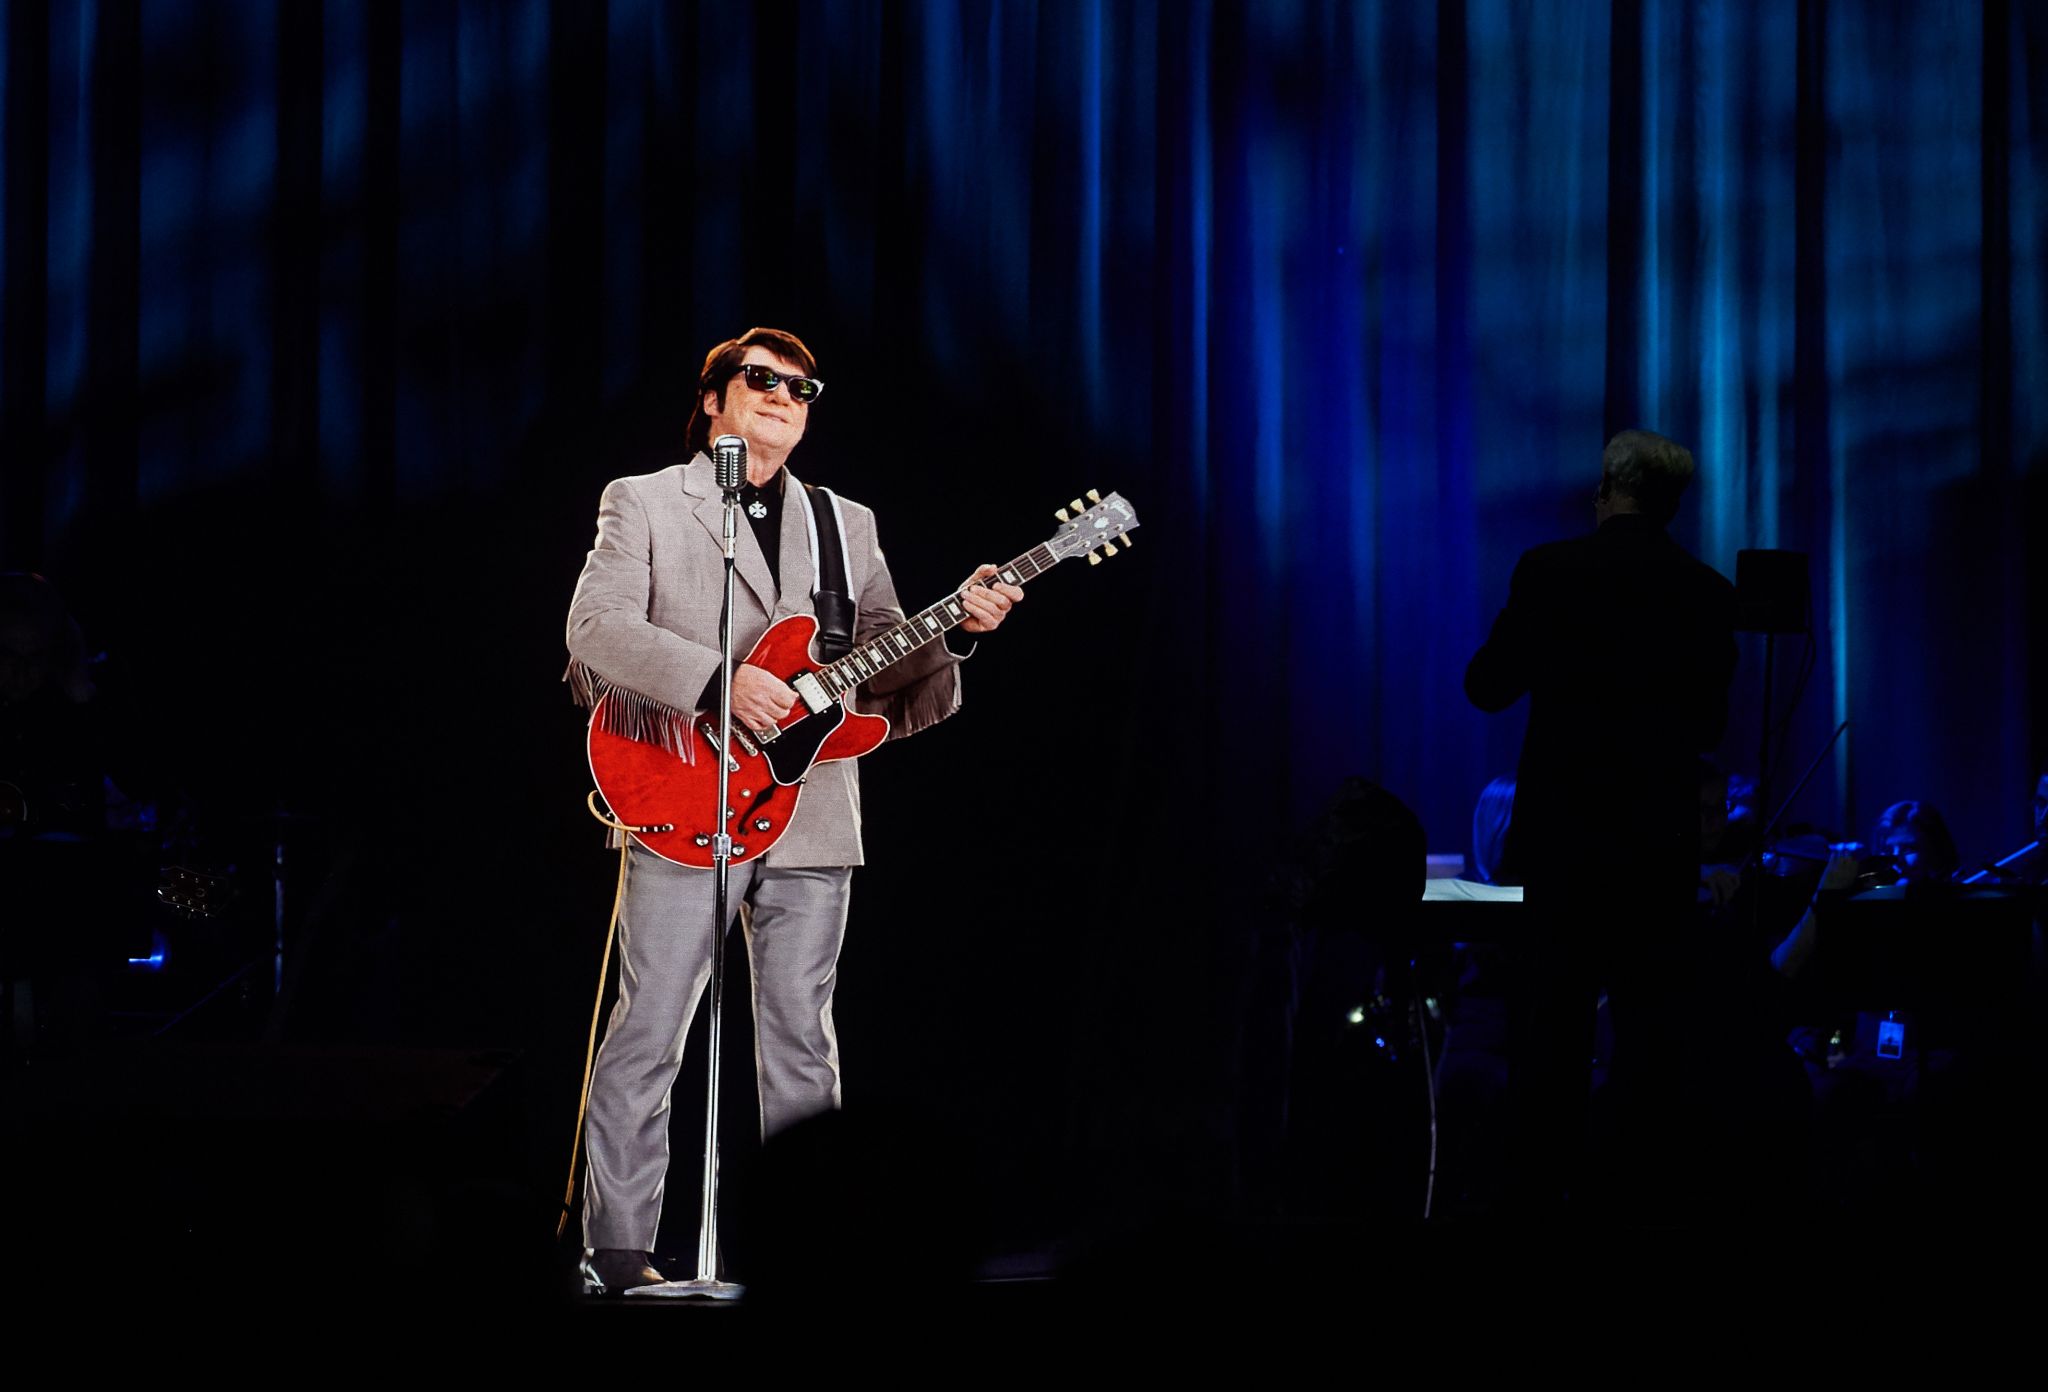 A 'hologram' of Roy Orbison will perform at Oakland's Fox Theater this fall - SFGate